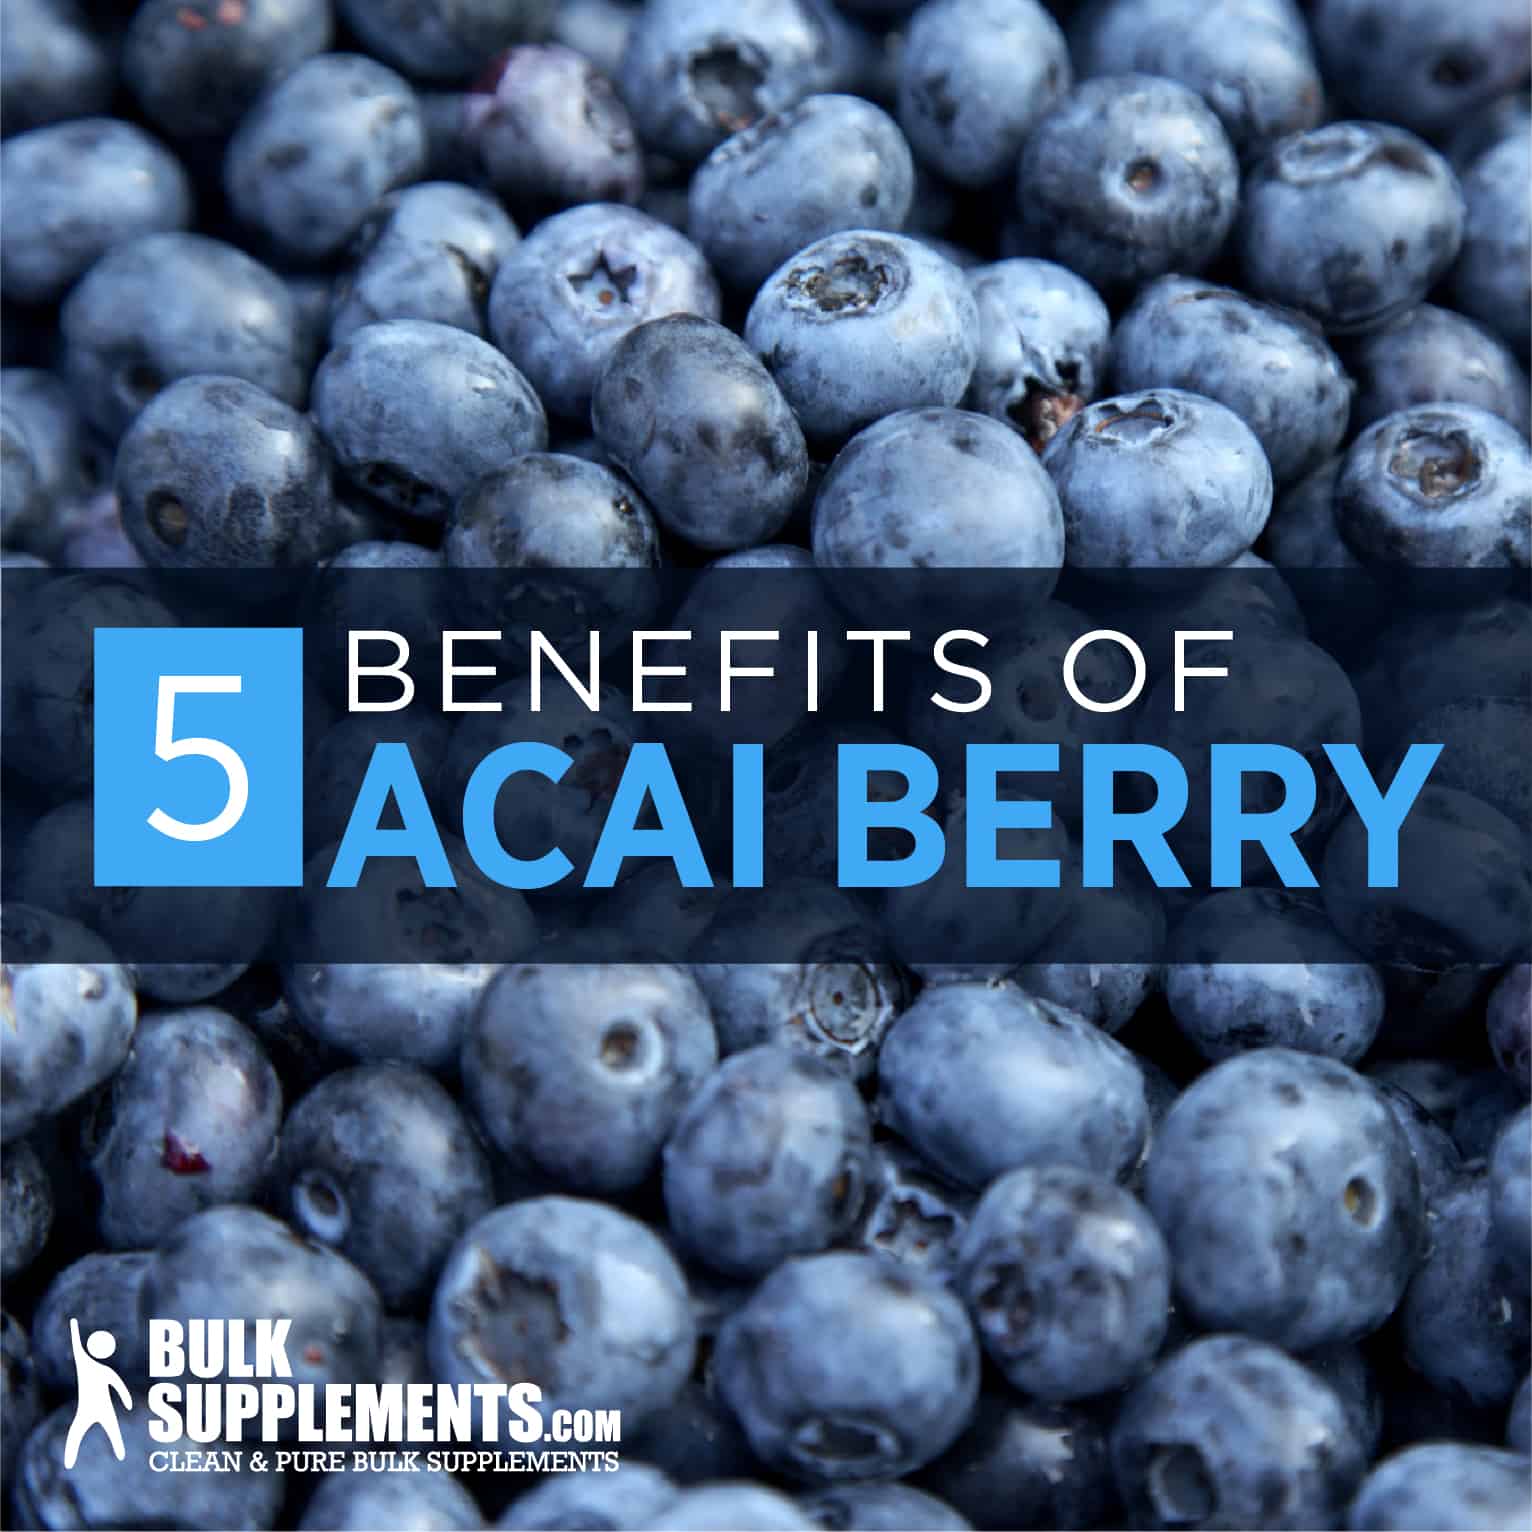 Are Acai Berries Healthy?